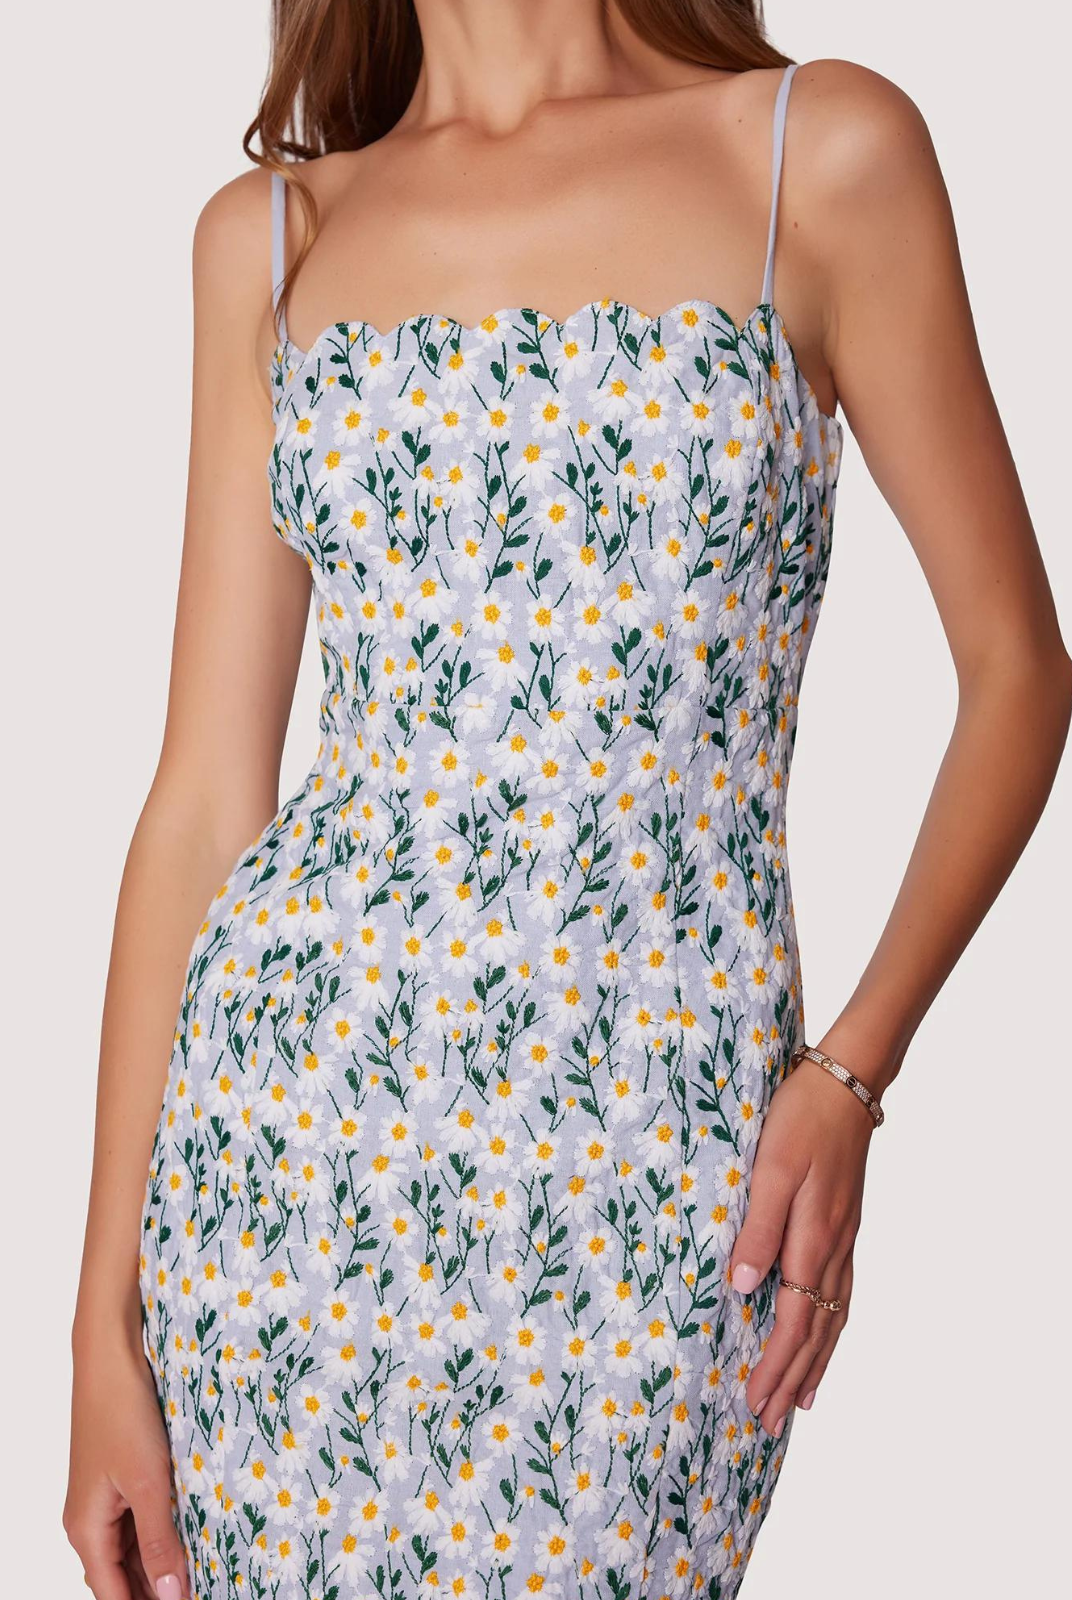 Lost + Wander Breath Of Youth Scallop Pencil Dress. Experience timeless elegance with the Breath Of Youth Scallop Pencil Dress. Its special floral embroidered fabrication adds a touch of sophistication, while the classic pencil skirt silhouette flatters your figure. Perfect for any spring event, this dress will make you feel confident and stylish.